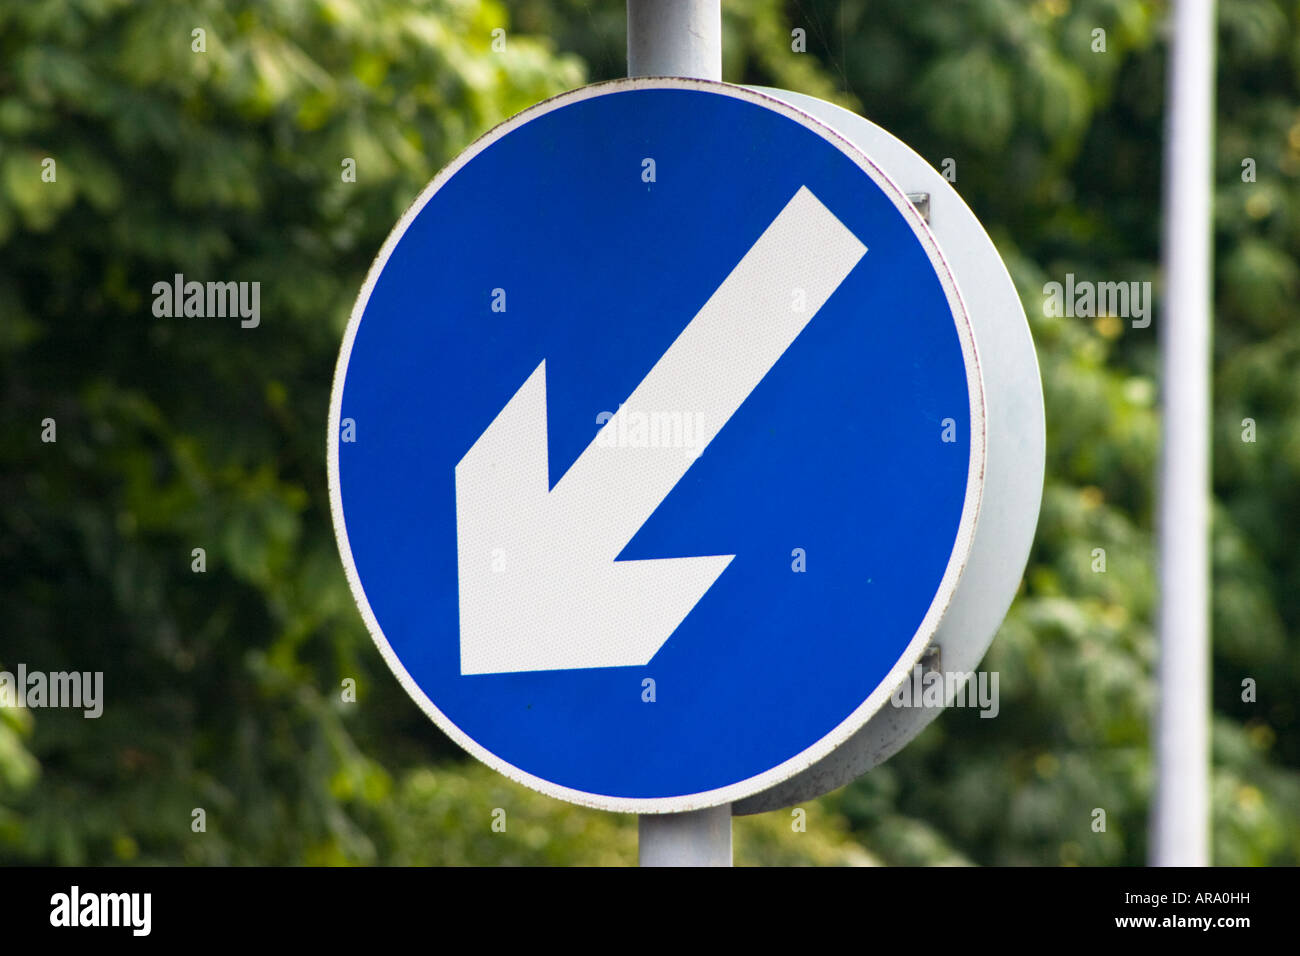 Keep left road sign Stock Photo